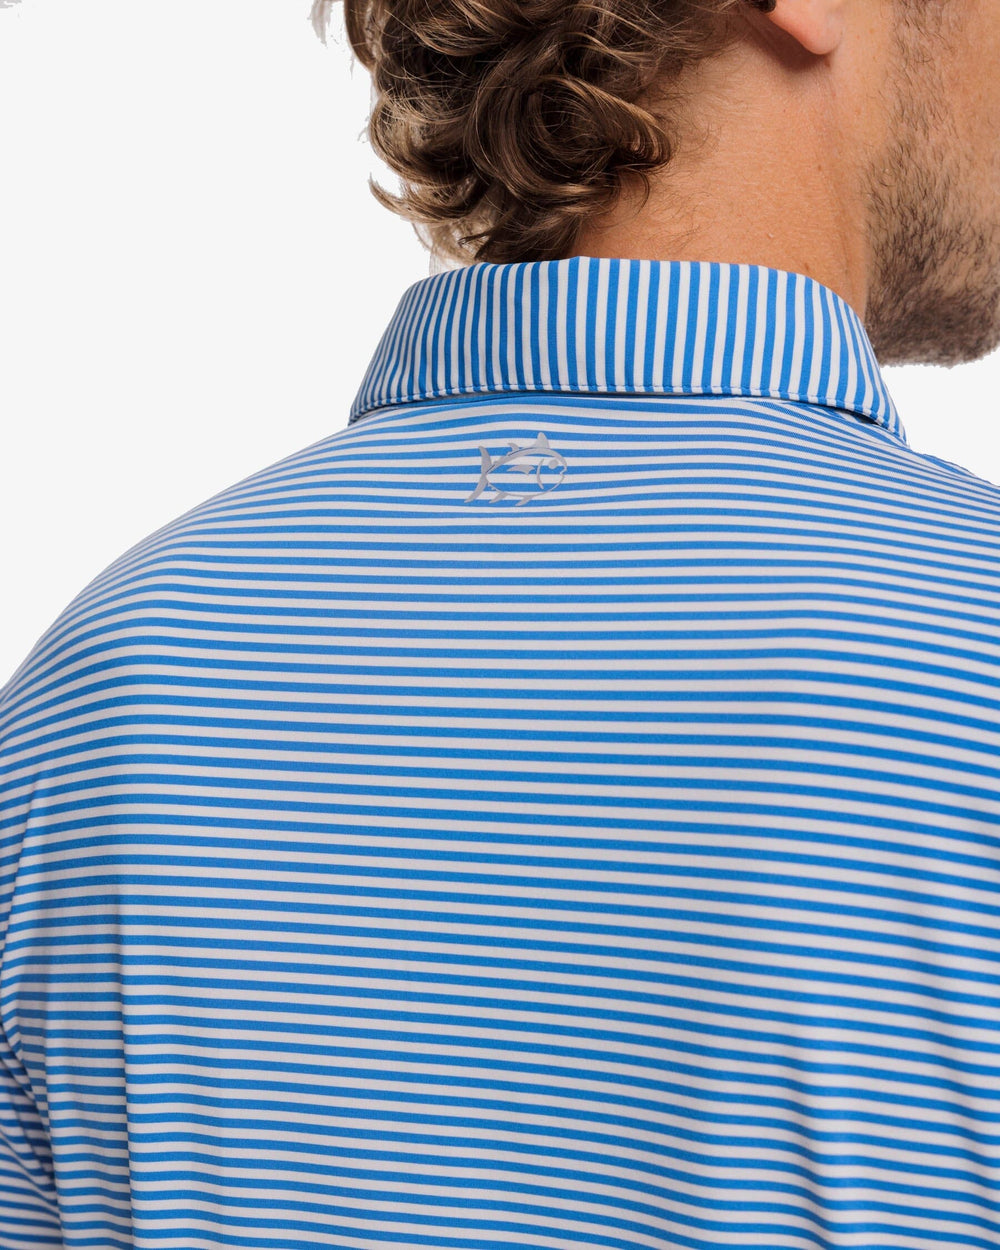 The detail view of the Southern Tide Shores Stripe brrr eeze Performance Polo Shirt by Southern Tide - Cloud White